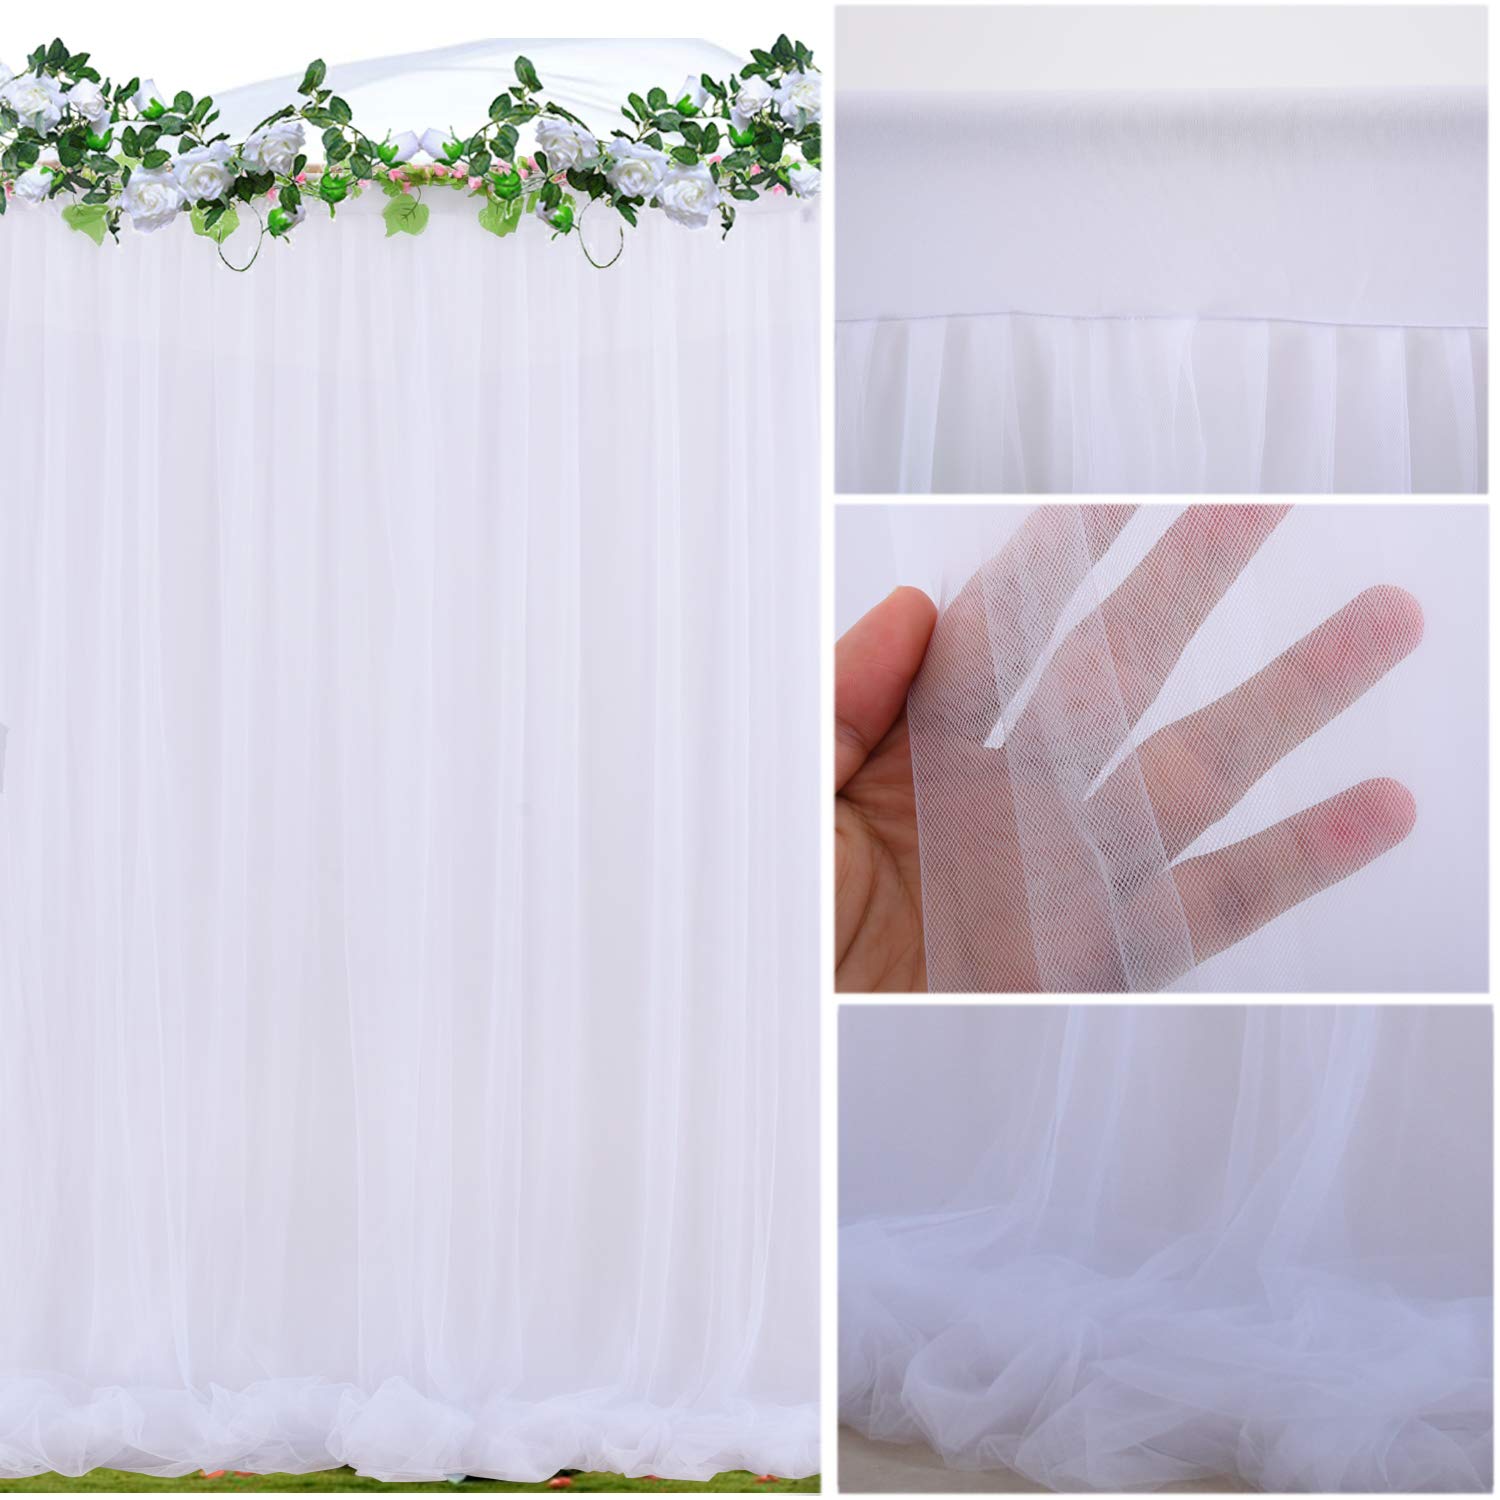 White Tulle Backdrop Curtain for Parties Wedding Baby Shower White Sheer Background for Bridal Shower Photography Props Gender Reveal Backdrop Drapes 5 ft X 7 ft